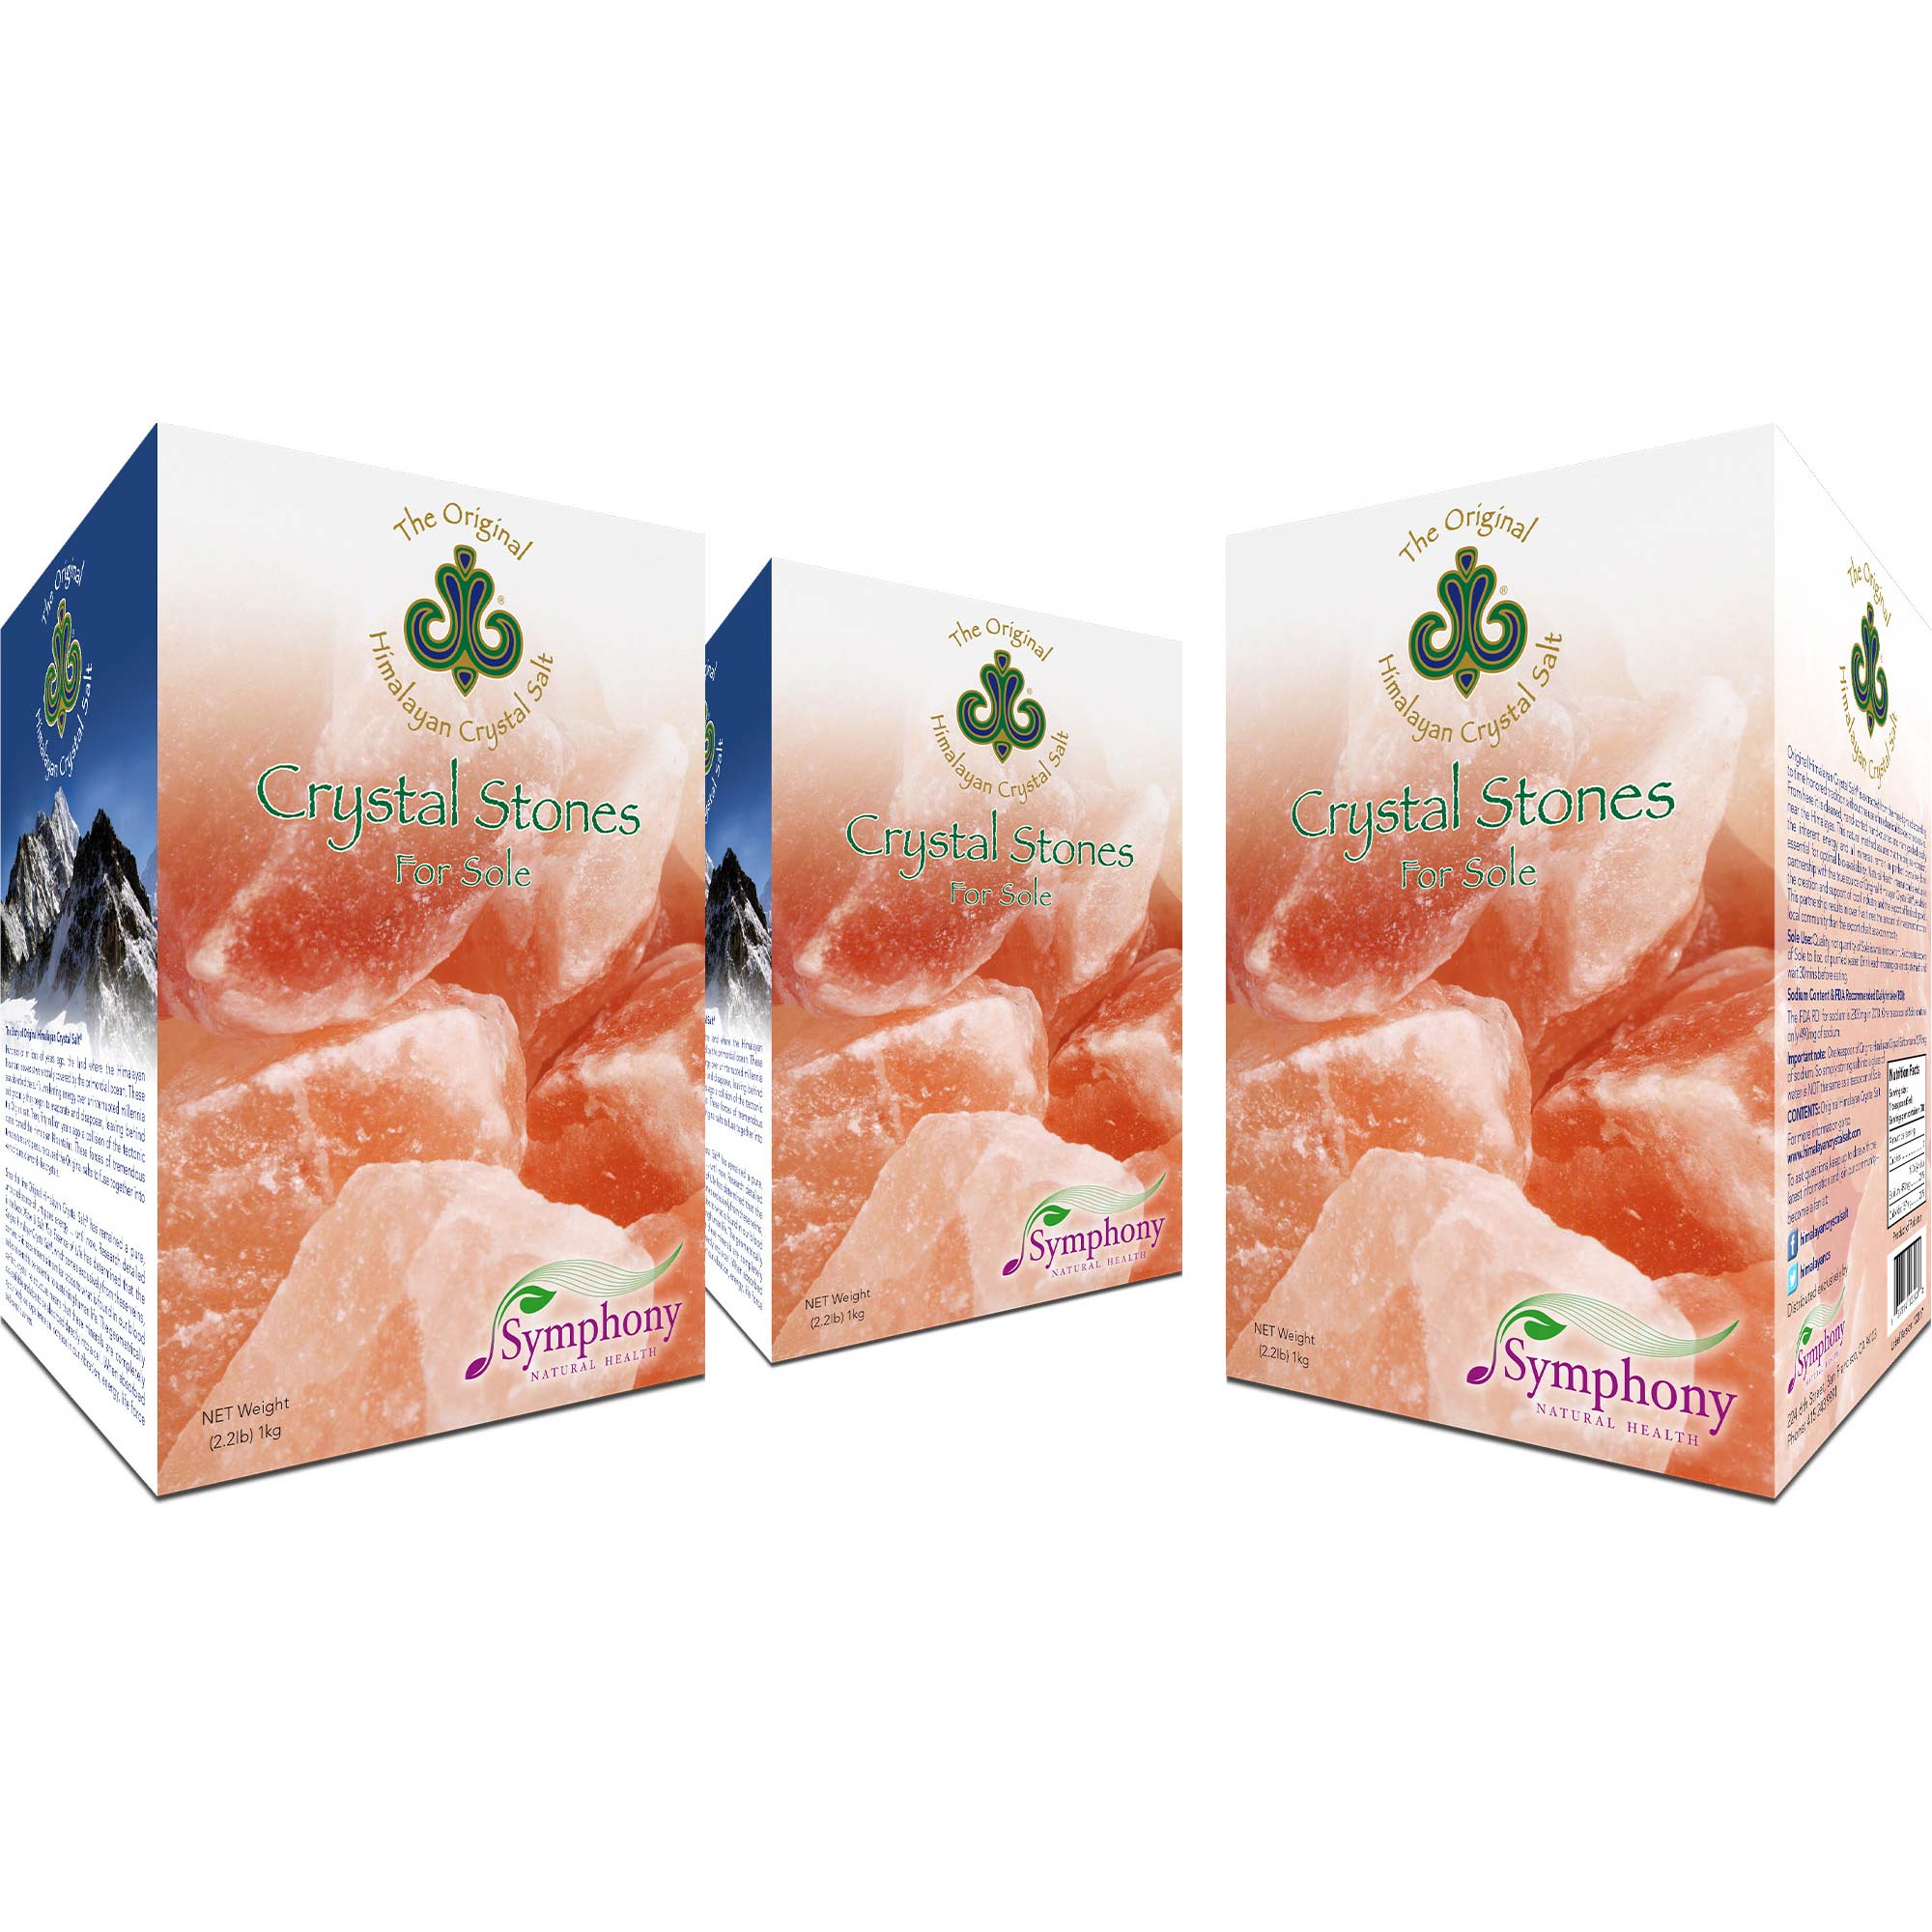 Crystal Salt Stones for Sole Bundle (3 Pack) three product boxes right-facing with Himalayan Crystal Salt stones and Himalayan Crystal Salt logo